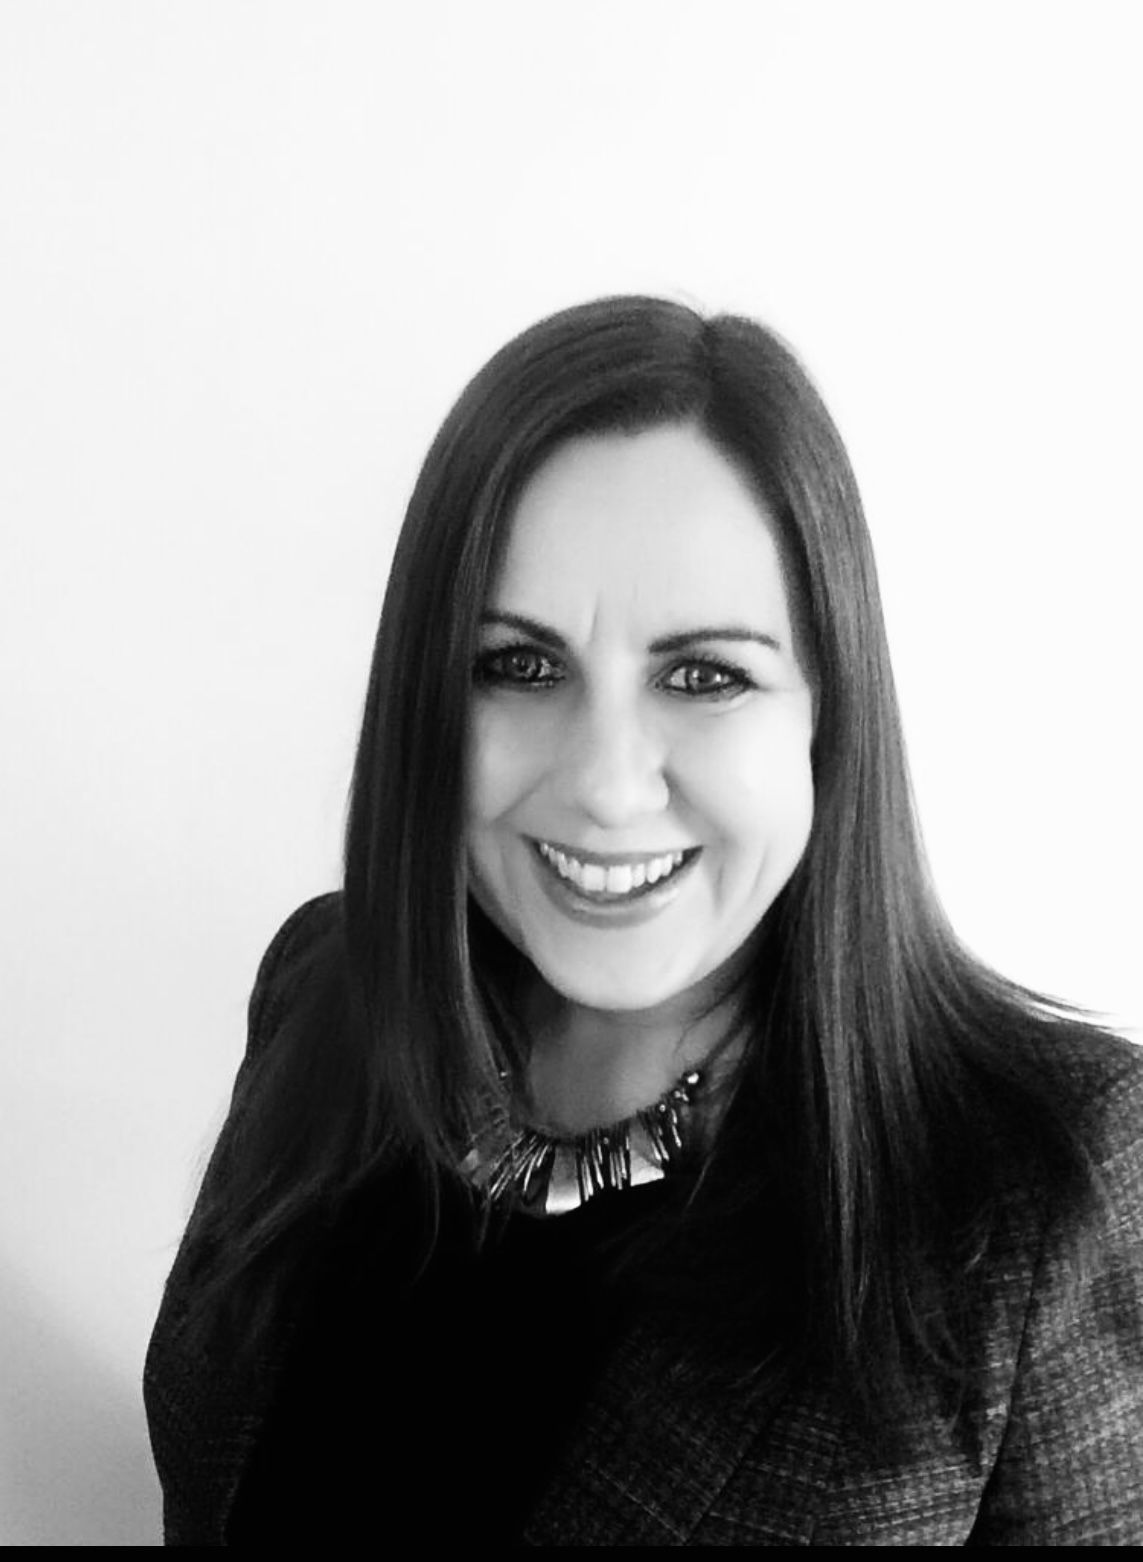 Helen Jones - Helen is a solicitor, admitted July 2005. She specialises in all aspects of Residential Conveyancing including technical and complex residential conveyancing transactions and land issues.